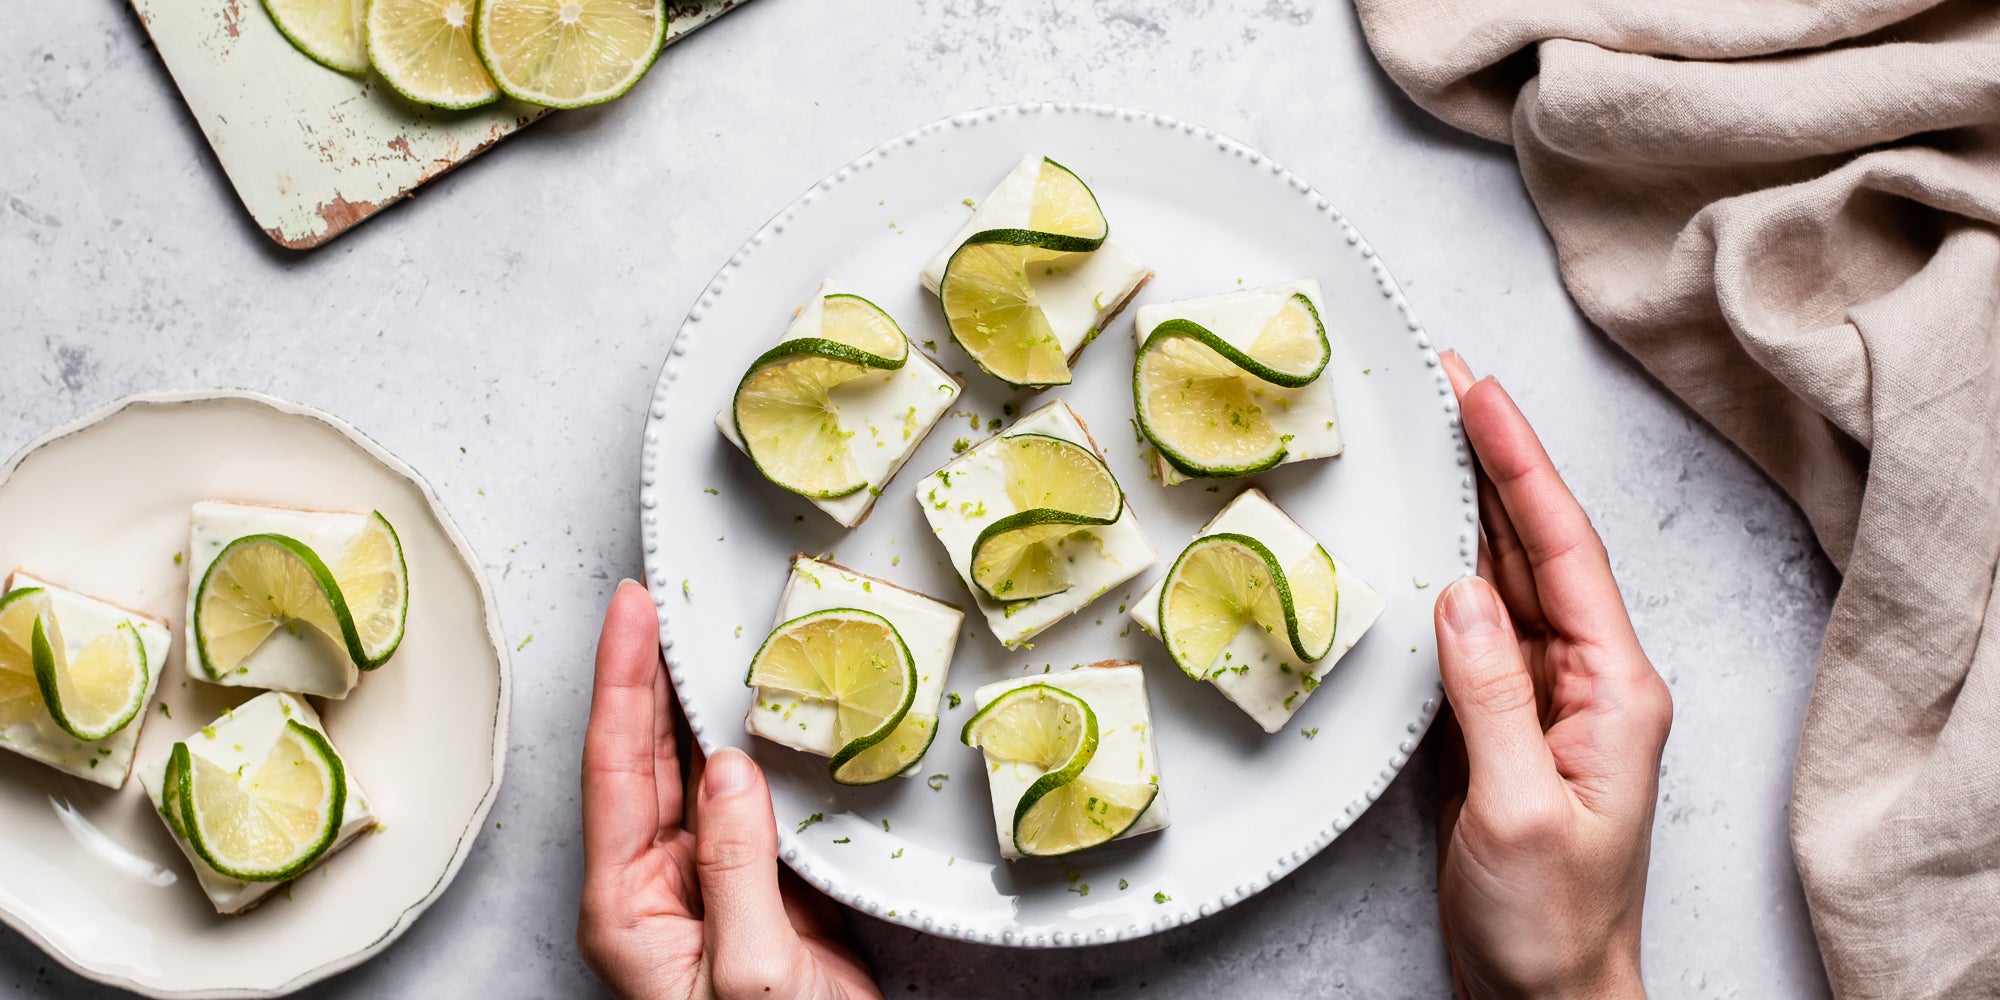 Hands holding a plate with slices of Margarita Bites topped with slices of twisted lime